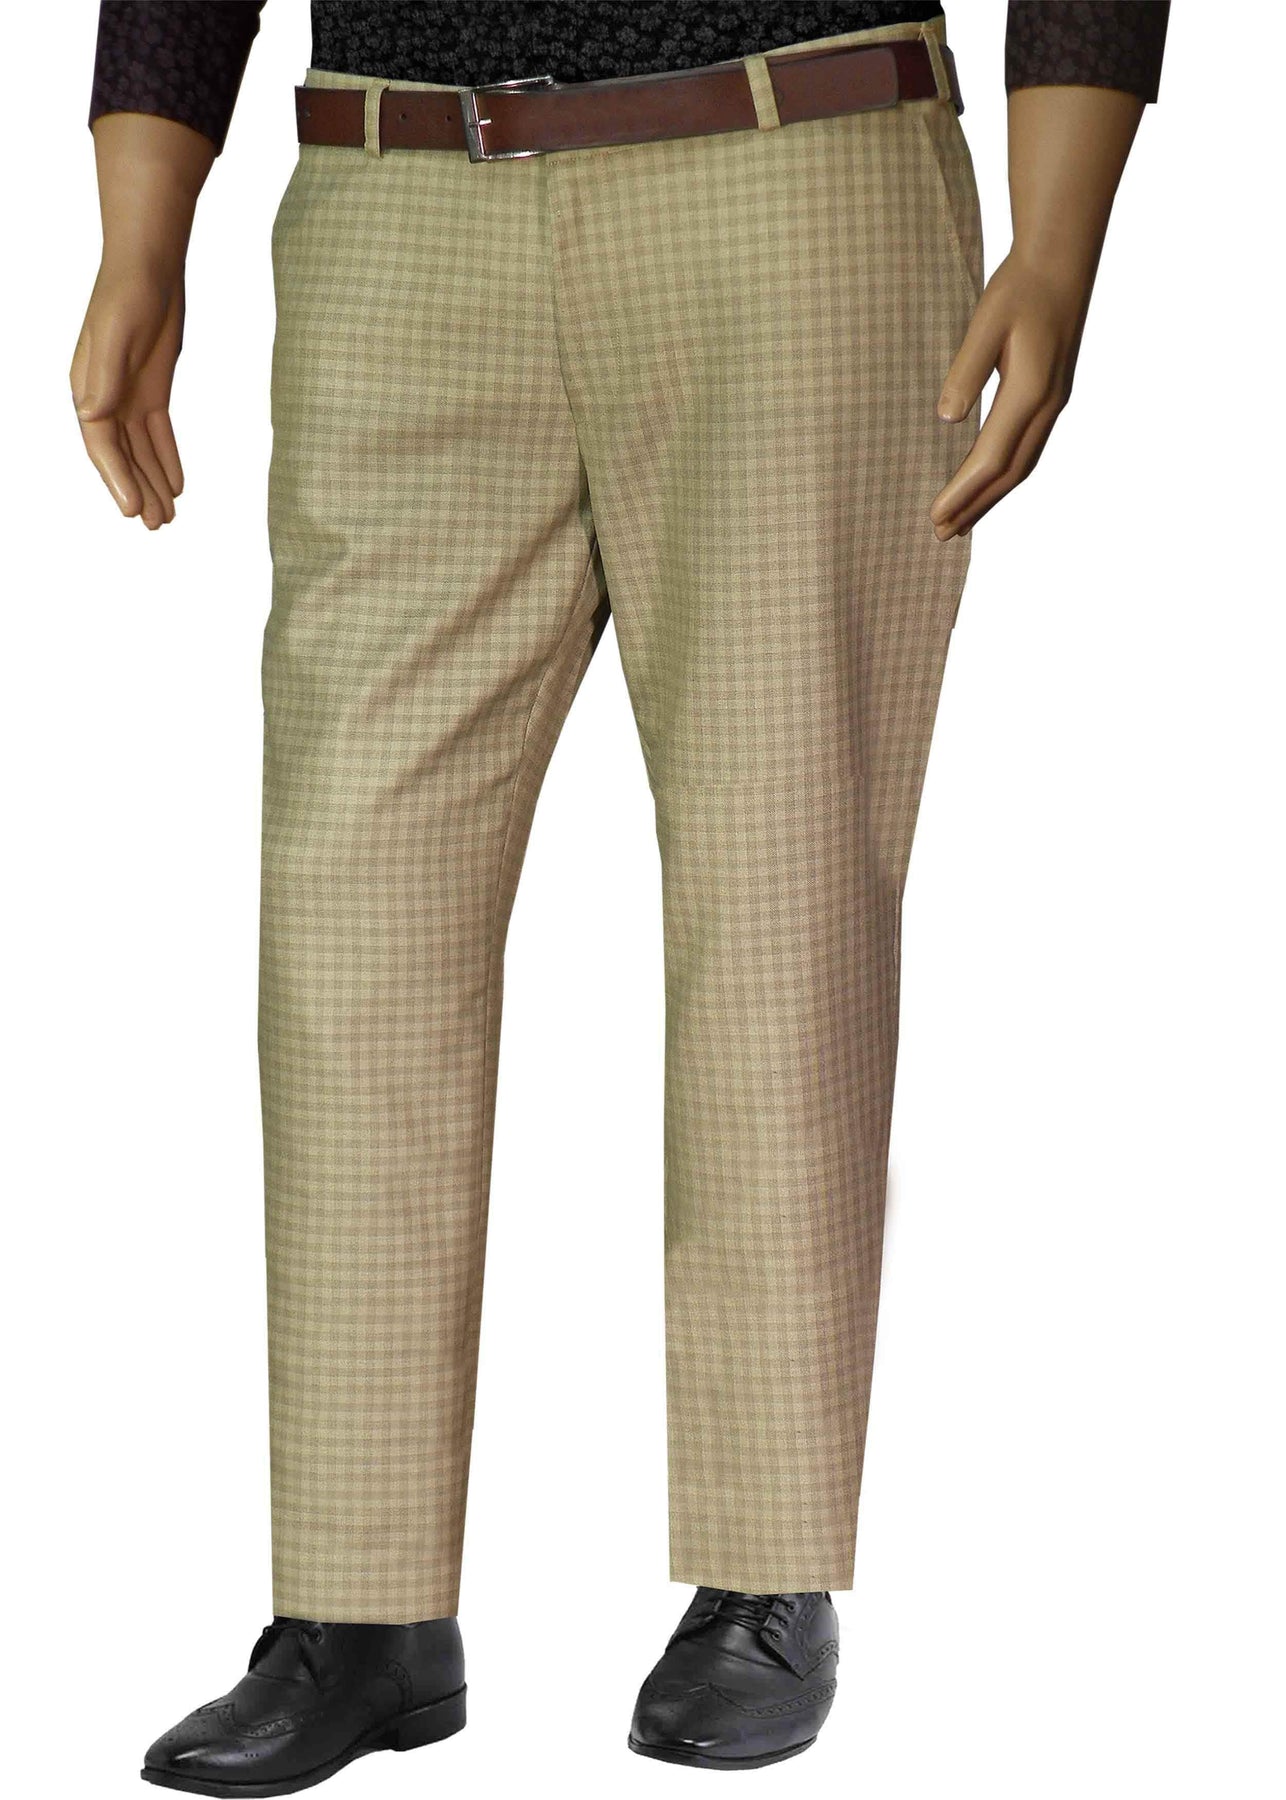 Buy Slim Fit Formal Trouser for Men, Cotton Formal Pants For Office Wear  Online In India At Discounted Prices